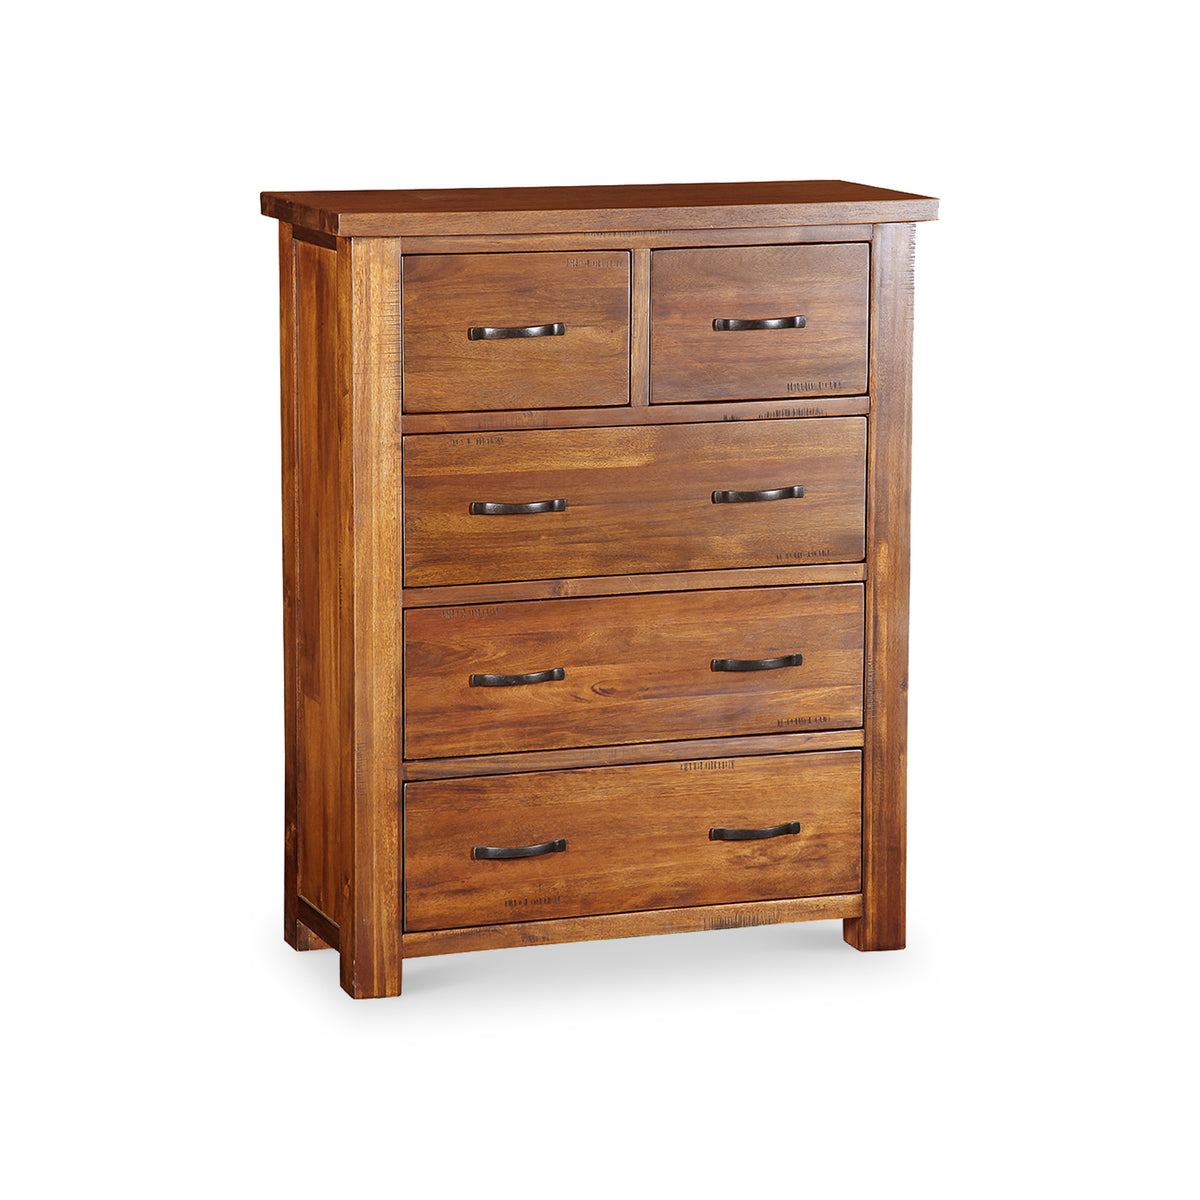 Ladock 2 Over 3 Chest of Drawers from Roseland Furniture